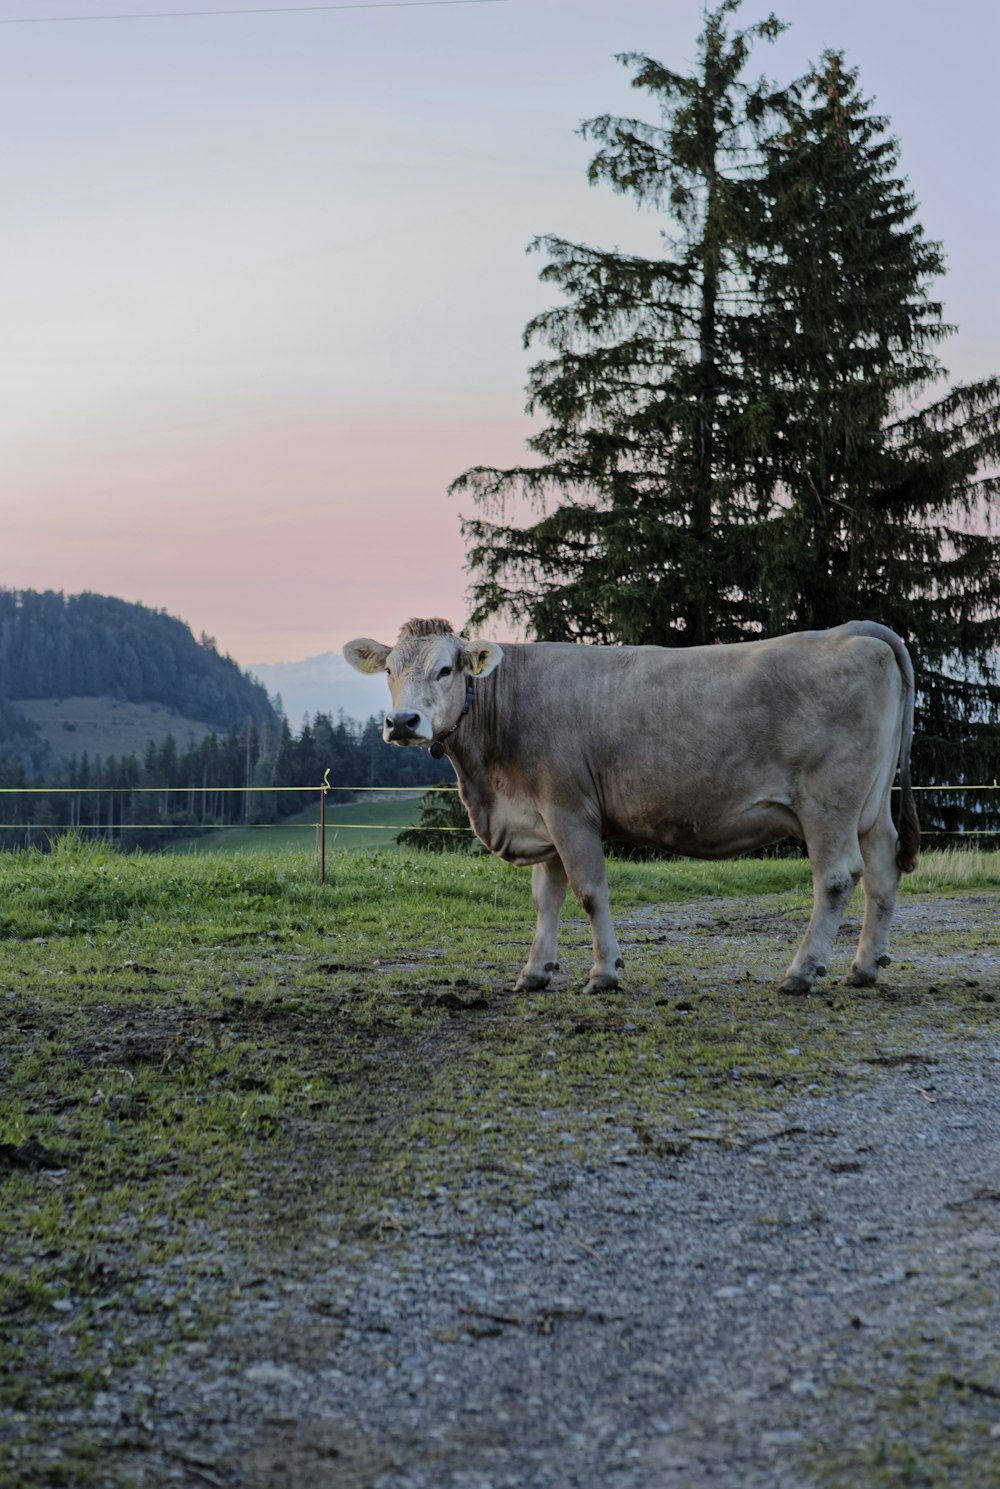 a cow standing on a dirt road in a field